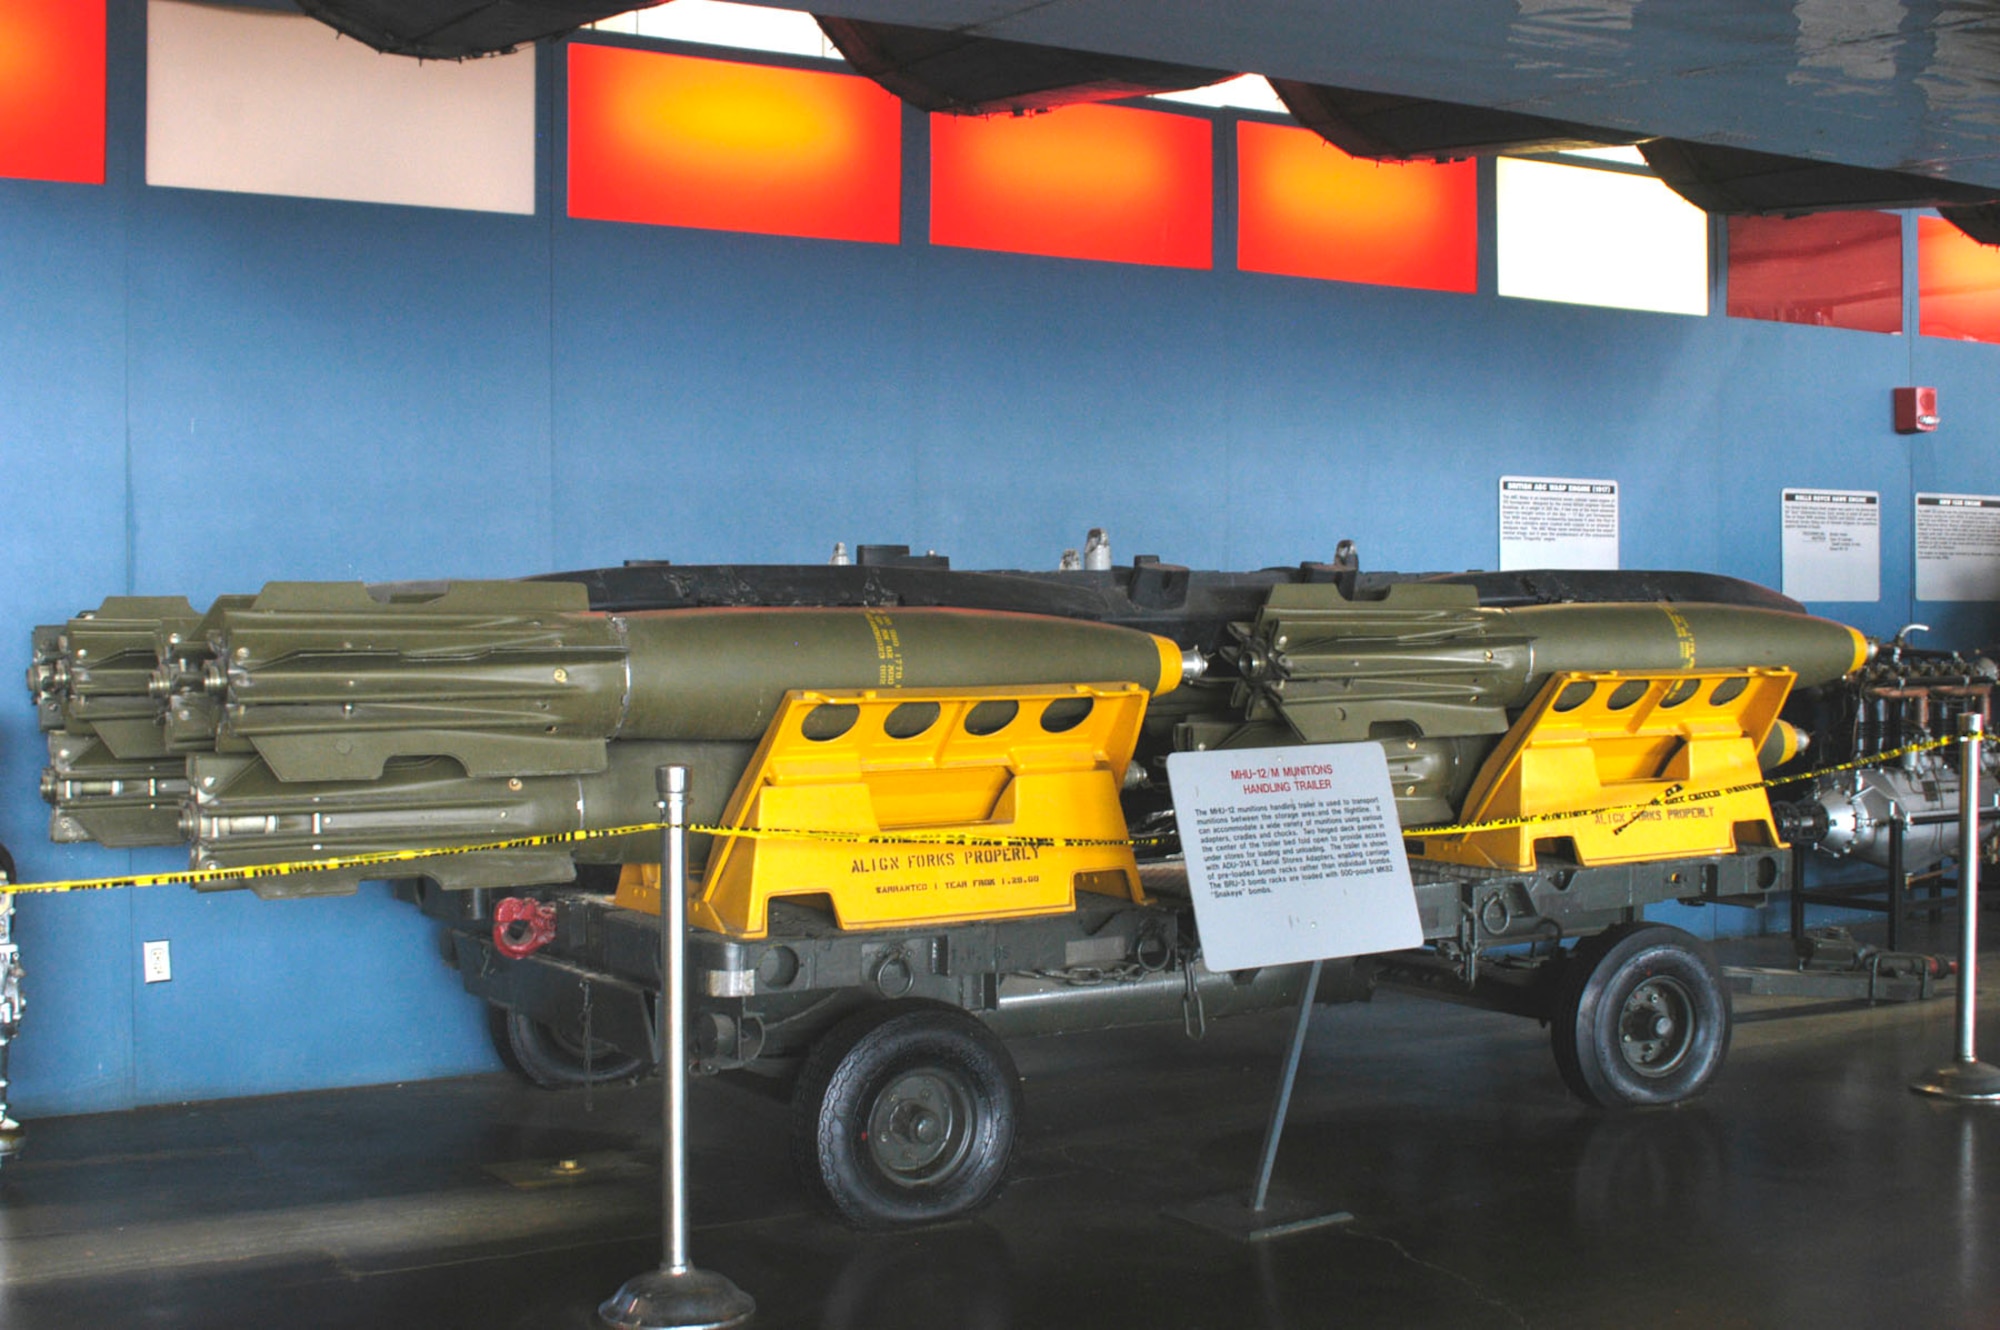 DAYTON, Ohio -- MHU-12/M Munitions Handling Trailer on display in the Research & Development Gallery at the National Museum of the United States Air Force. (U.S. Air Force photo)